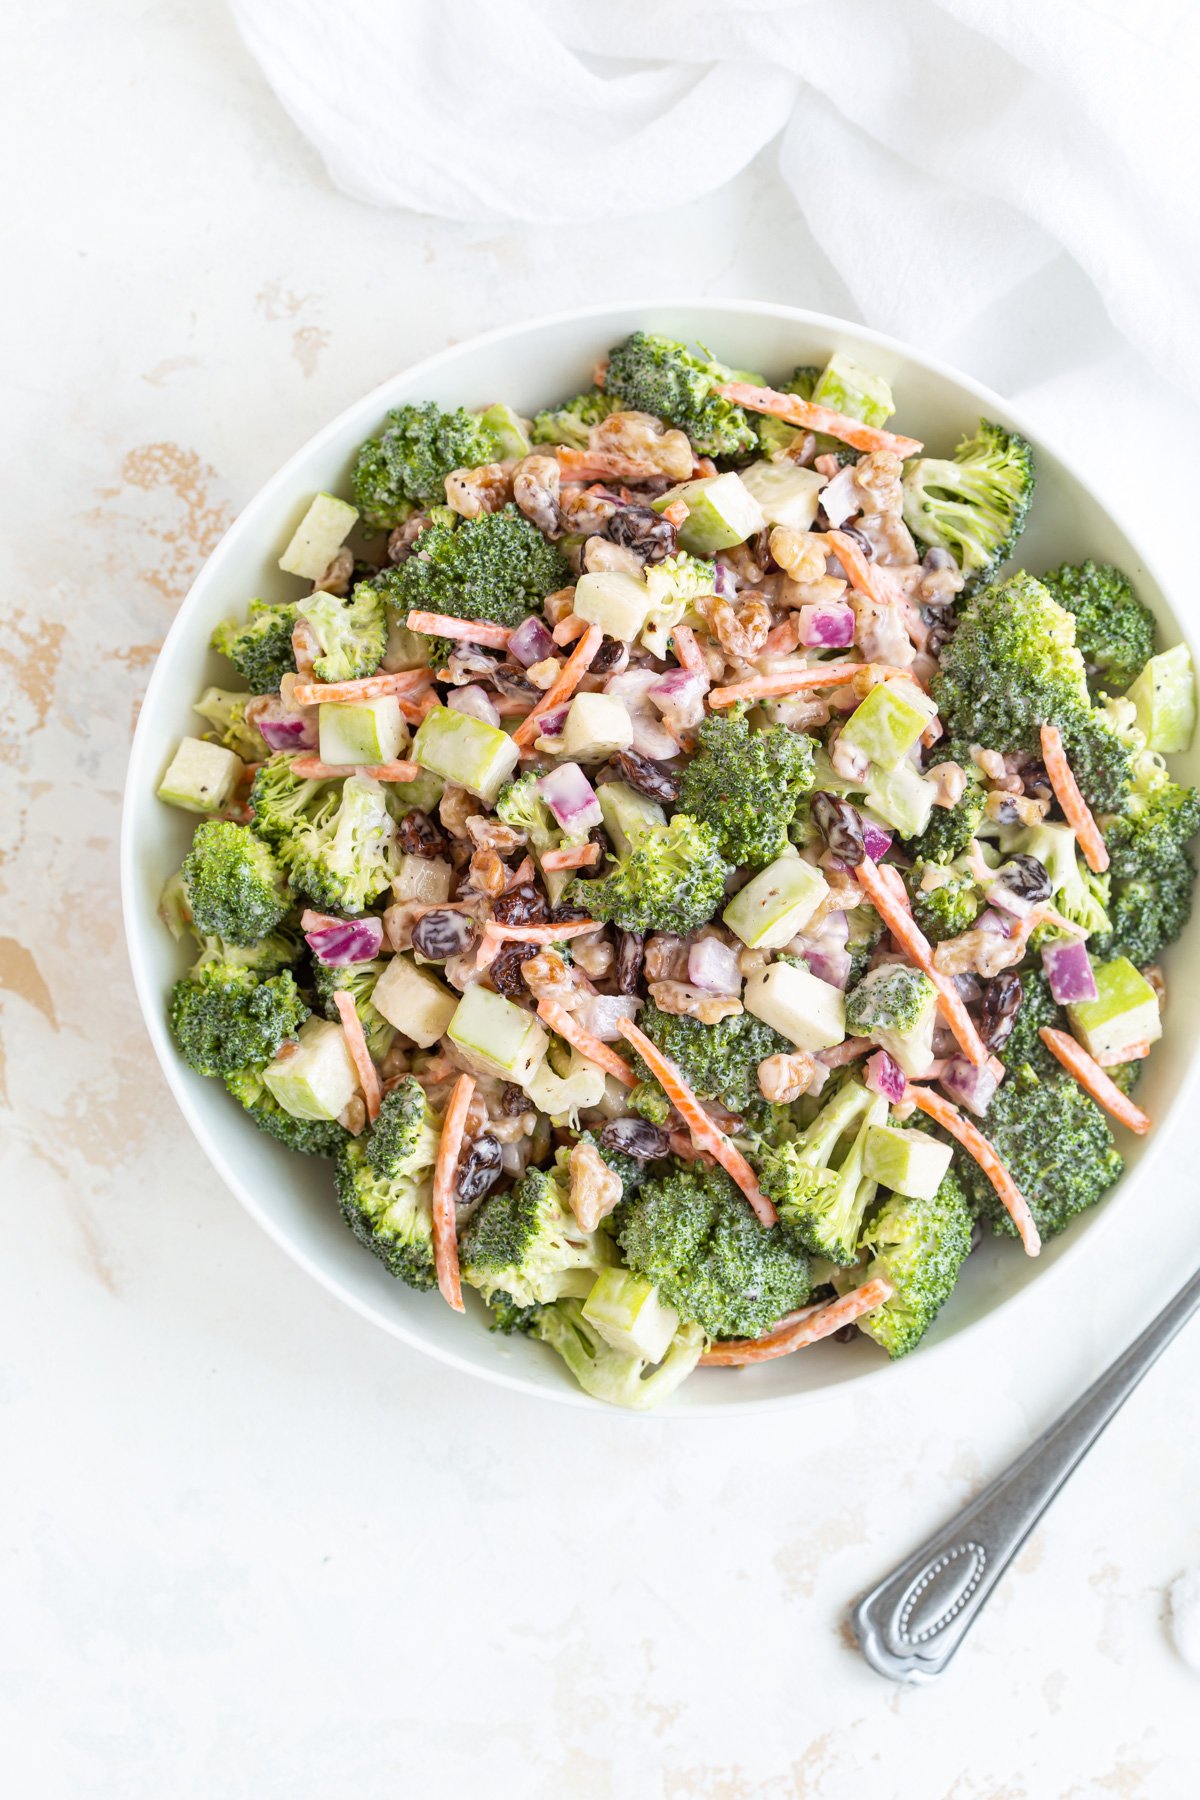 Overhead view of creamy broccoli salad in a white bowl beside a spoon.